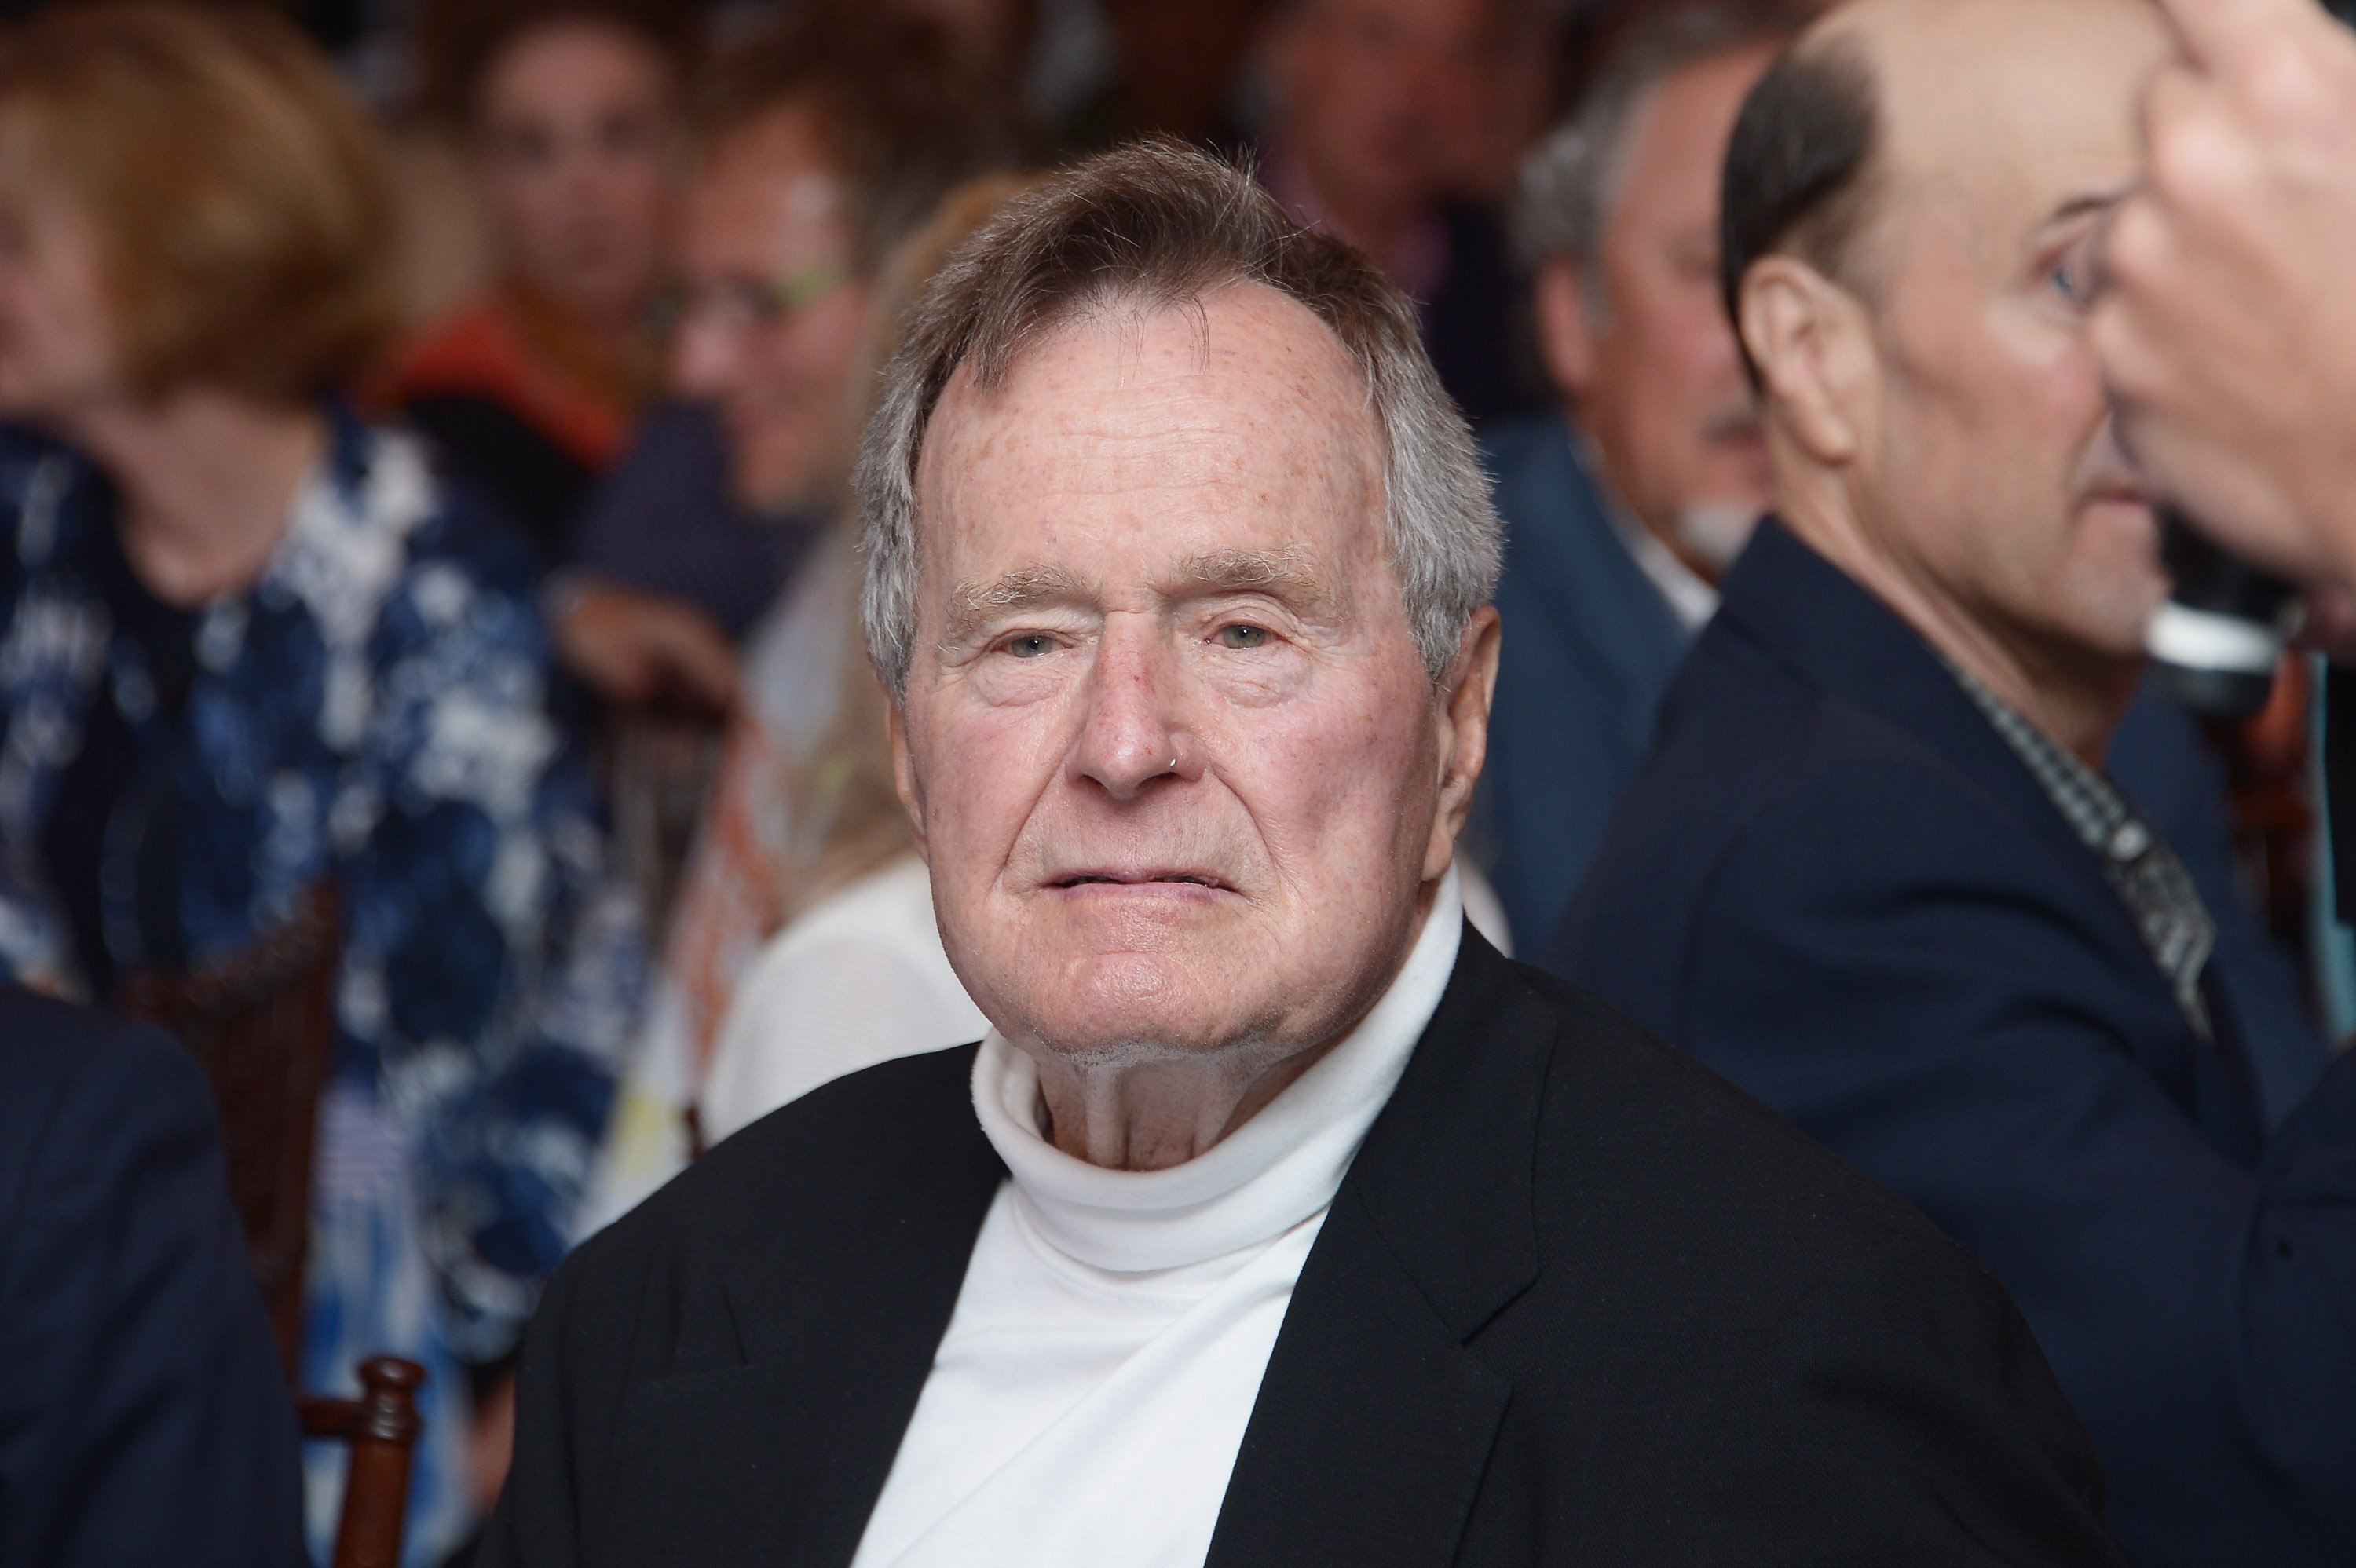 Former U.S. President George H.W. Bush celebrating his 88th birthday after the premiere of HBO Documentary's screening of "41" | Photo: Getty Images